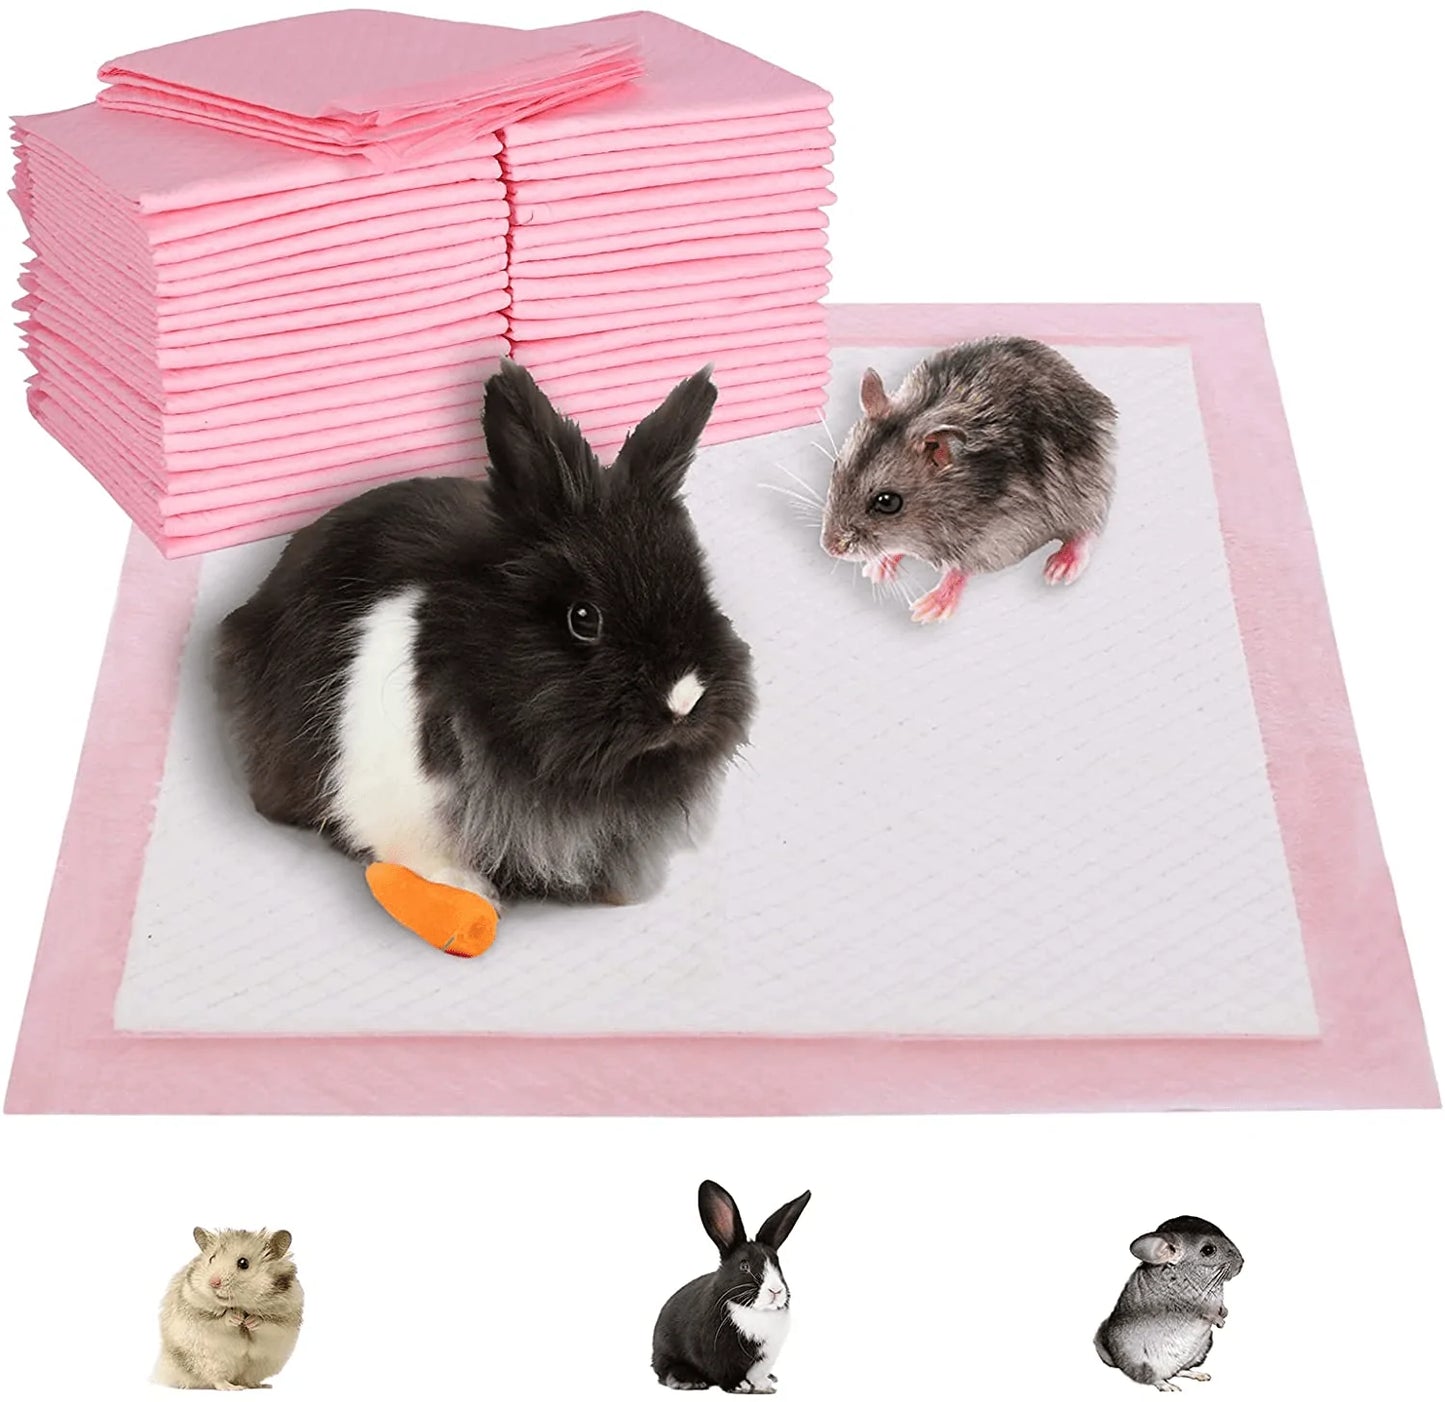 （50/100Pcs）Super Absorbent Rabbit Pee Pads, Disposable Bunny Litter Training Pad Thicken Guinea Pig Cage Liner Small Animal Diaper Pet Cage Accessory for Cat Hamster Reptile Chinchilla Hedgehog Animals & Pet Supplies > Pet Supplies > Dog Supplies > Dog Diaper Pads & Liners YUNVI 18″ × 13″ × 50pcs  